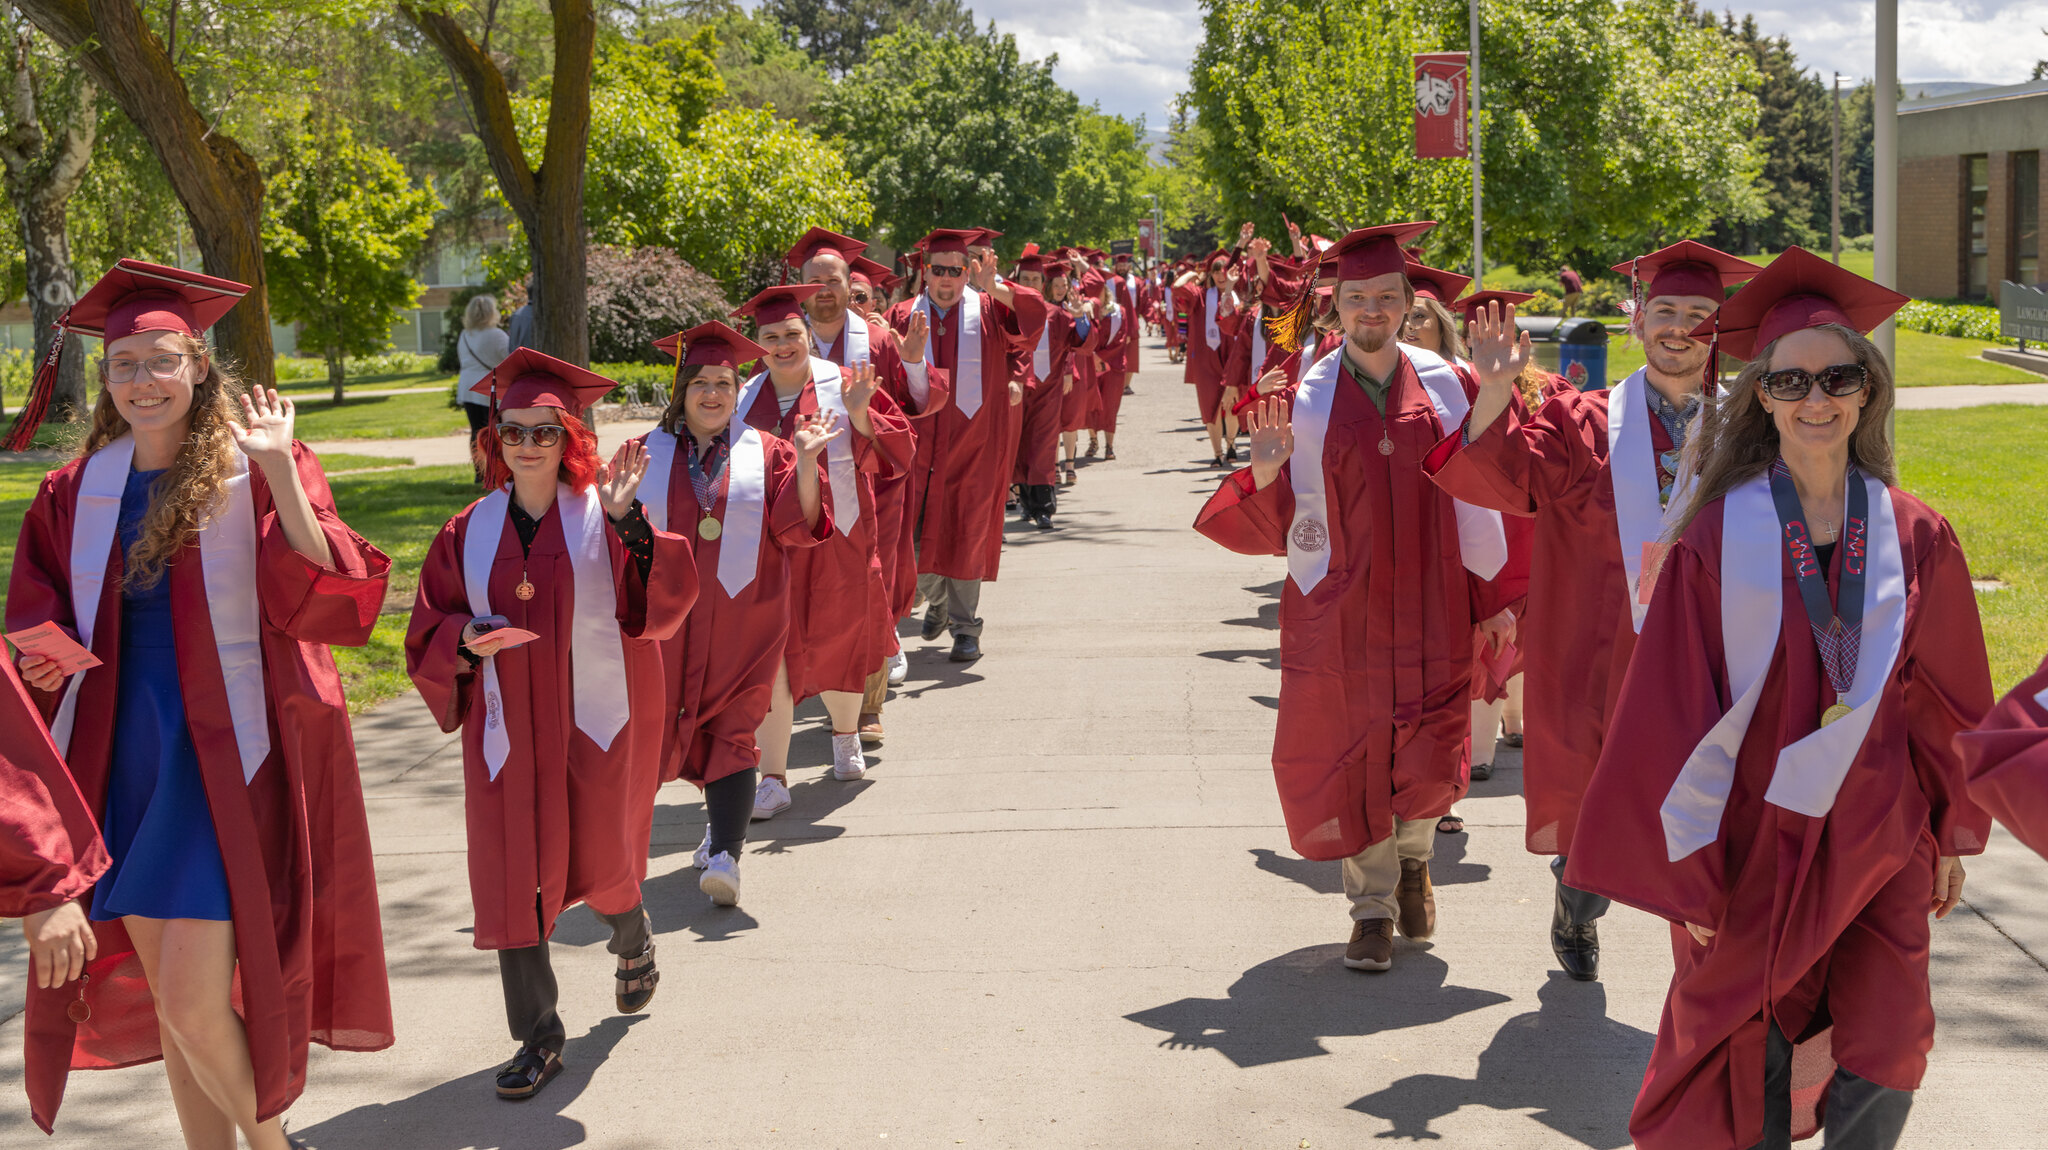 Photo of CWU graduates, smiling and waving as they walk to the commencement ceremony